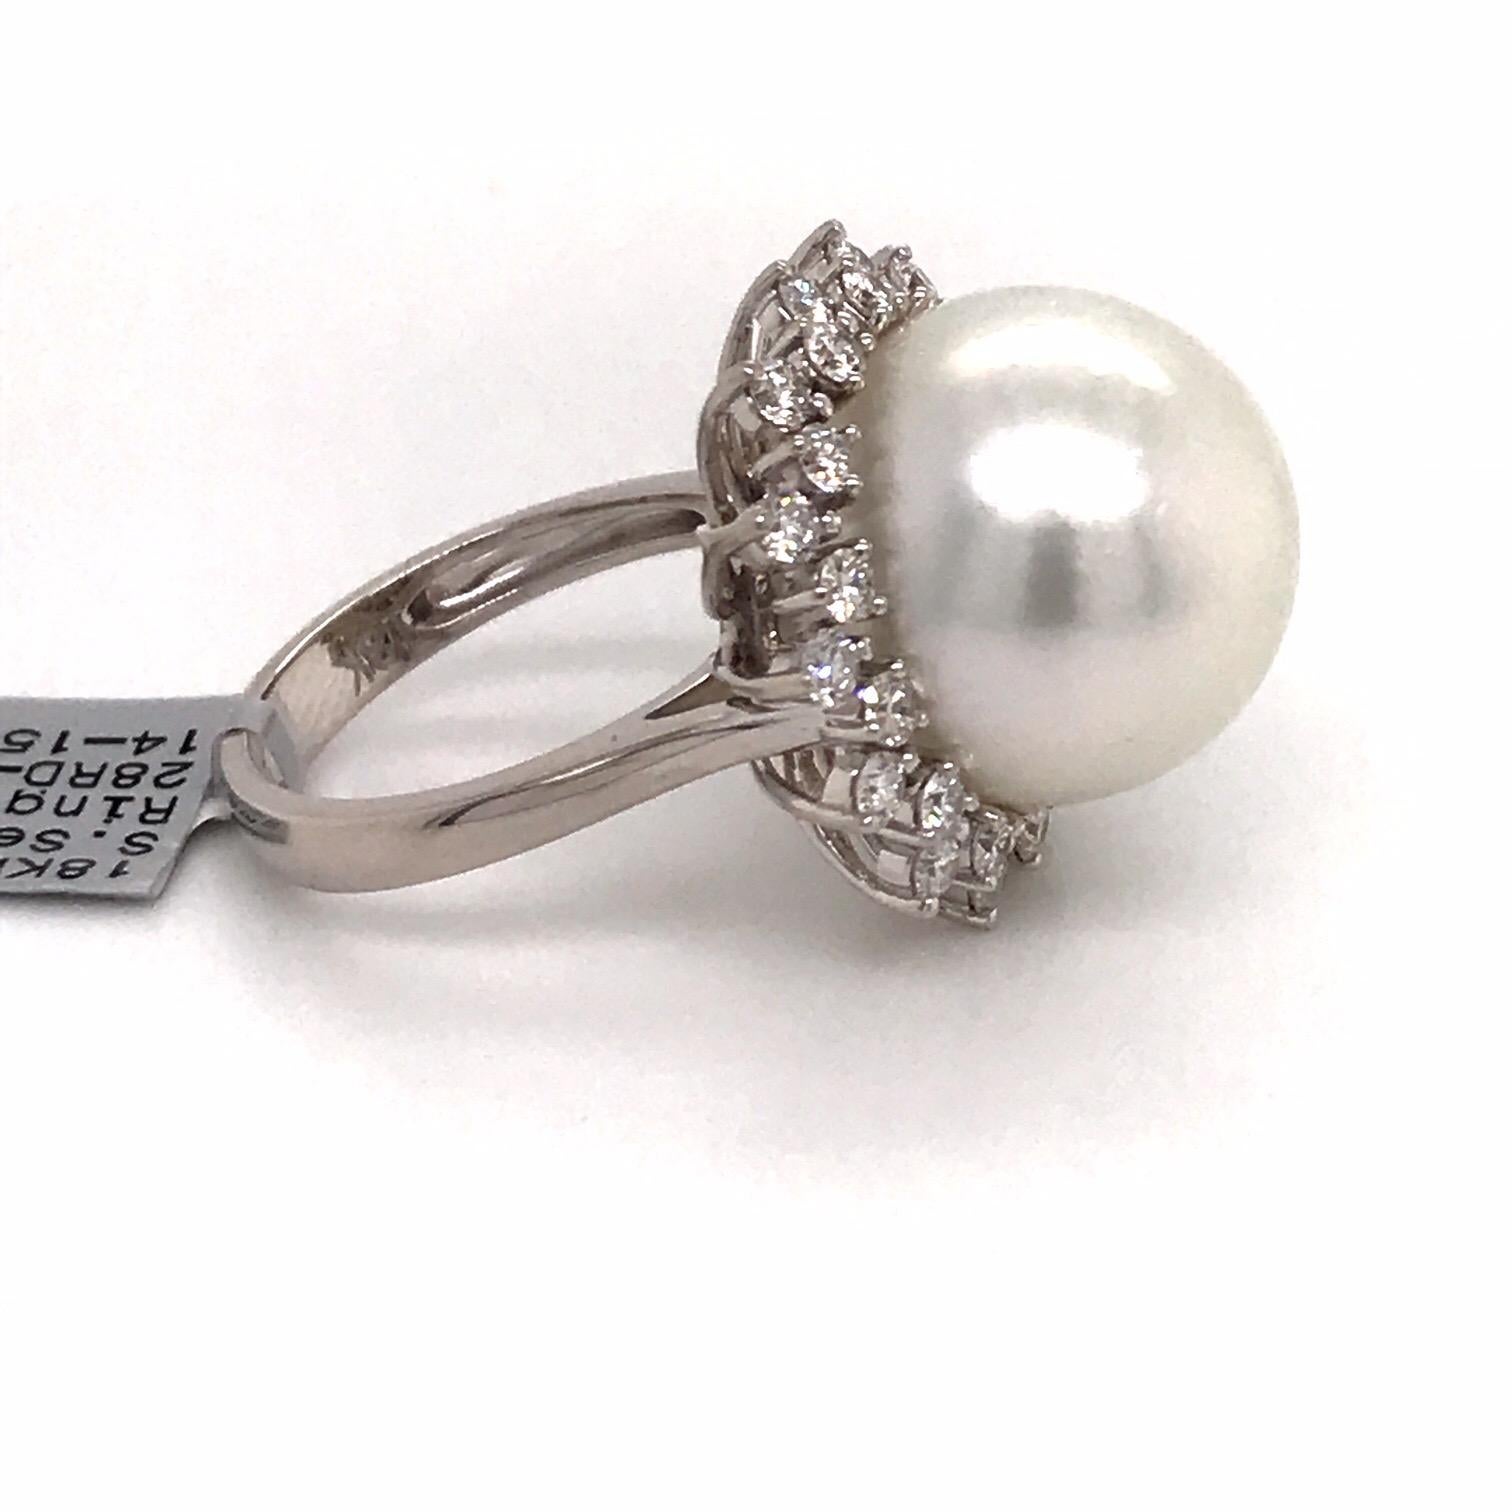 18K White gold ring featuring one South Sea Pearl measuring 14-15 mm flanked with 28 round brilliants weighing 0.98 carats. 


Color: G-H
Clarity: SI

Measurements:
South Sea Pearl: 14-15 MM
Diameter: 20.8 MM
Height On Finger: 16.1 MM

Ring is